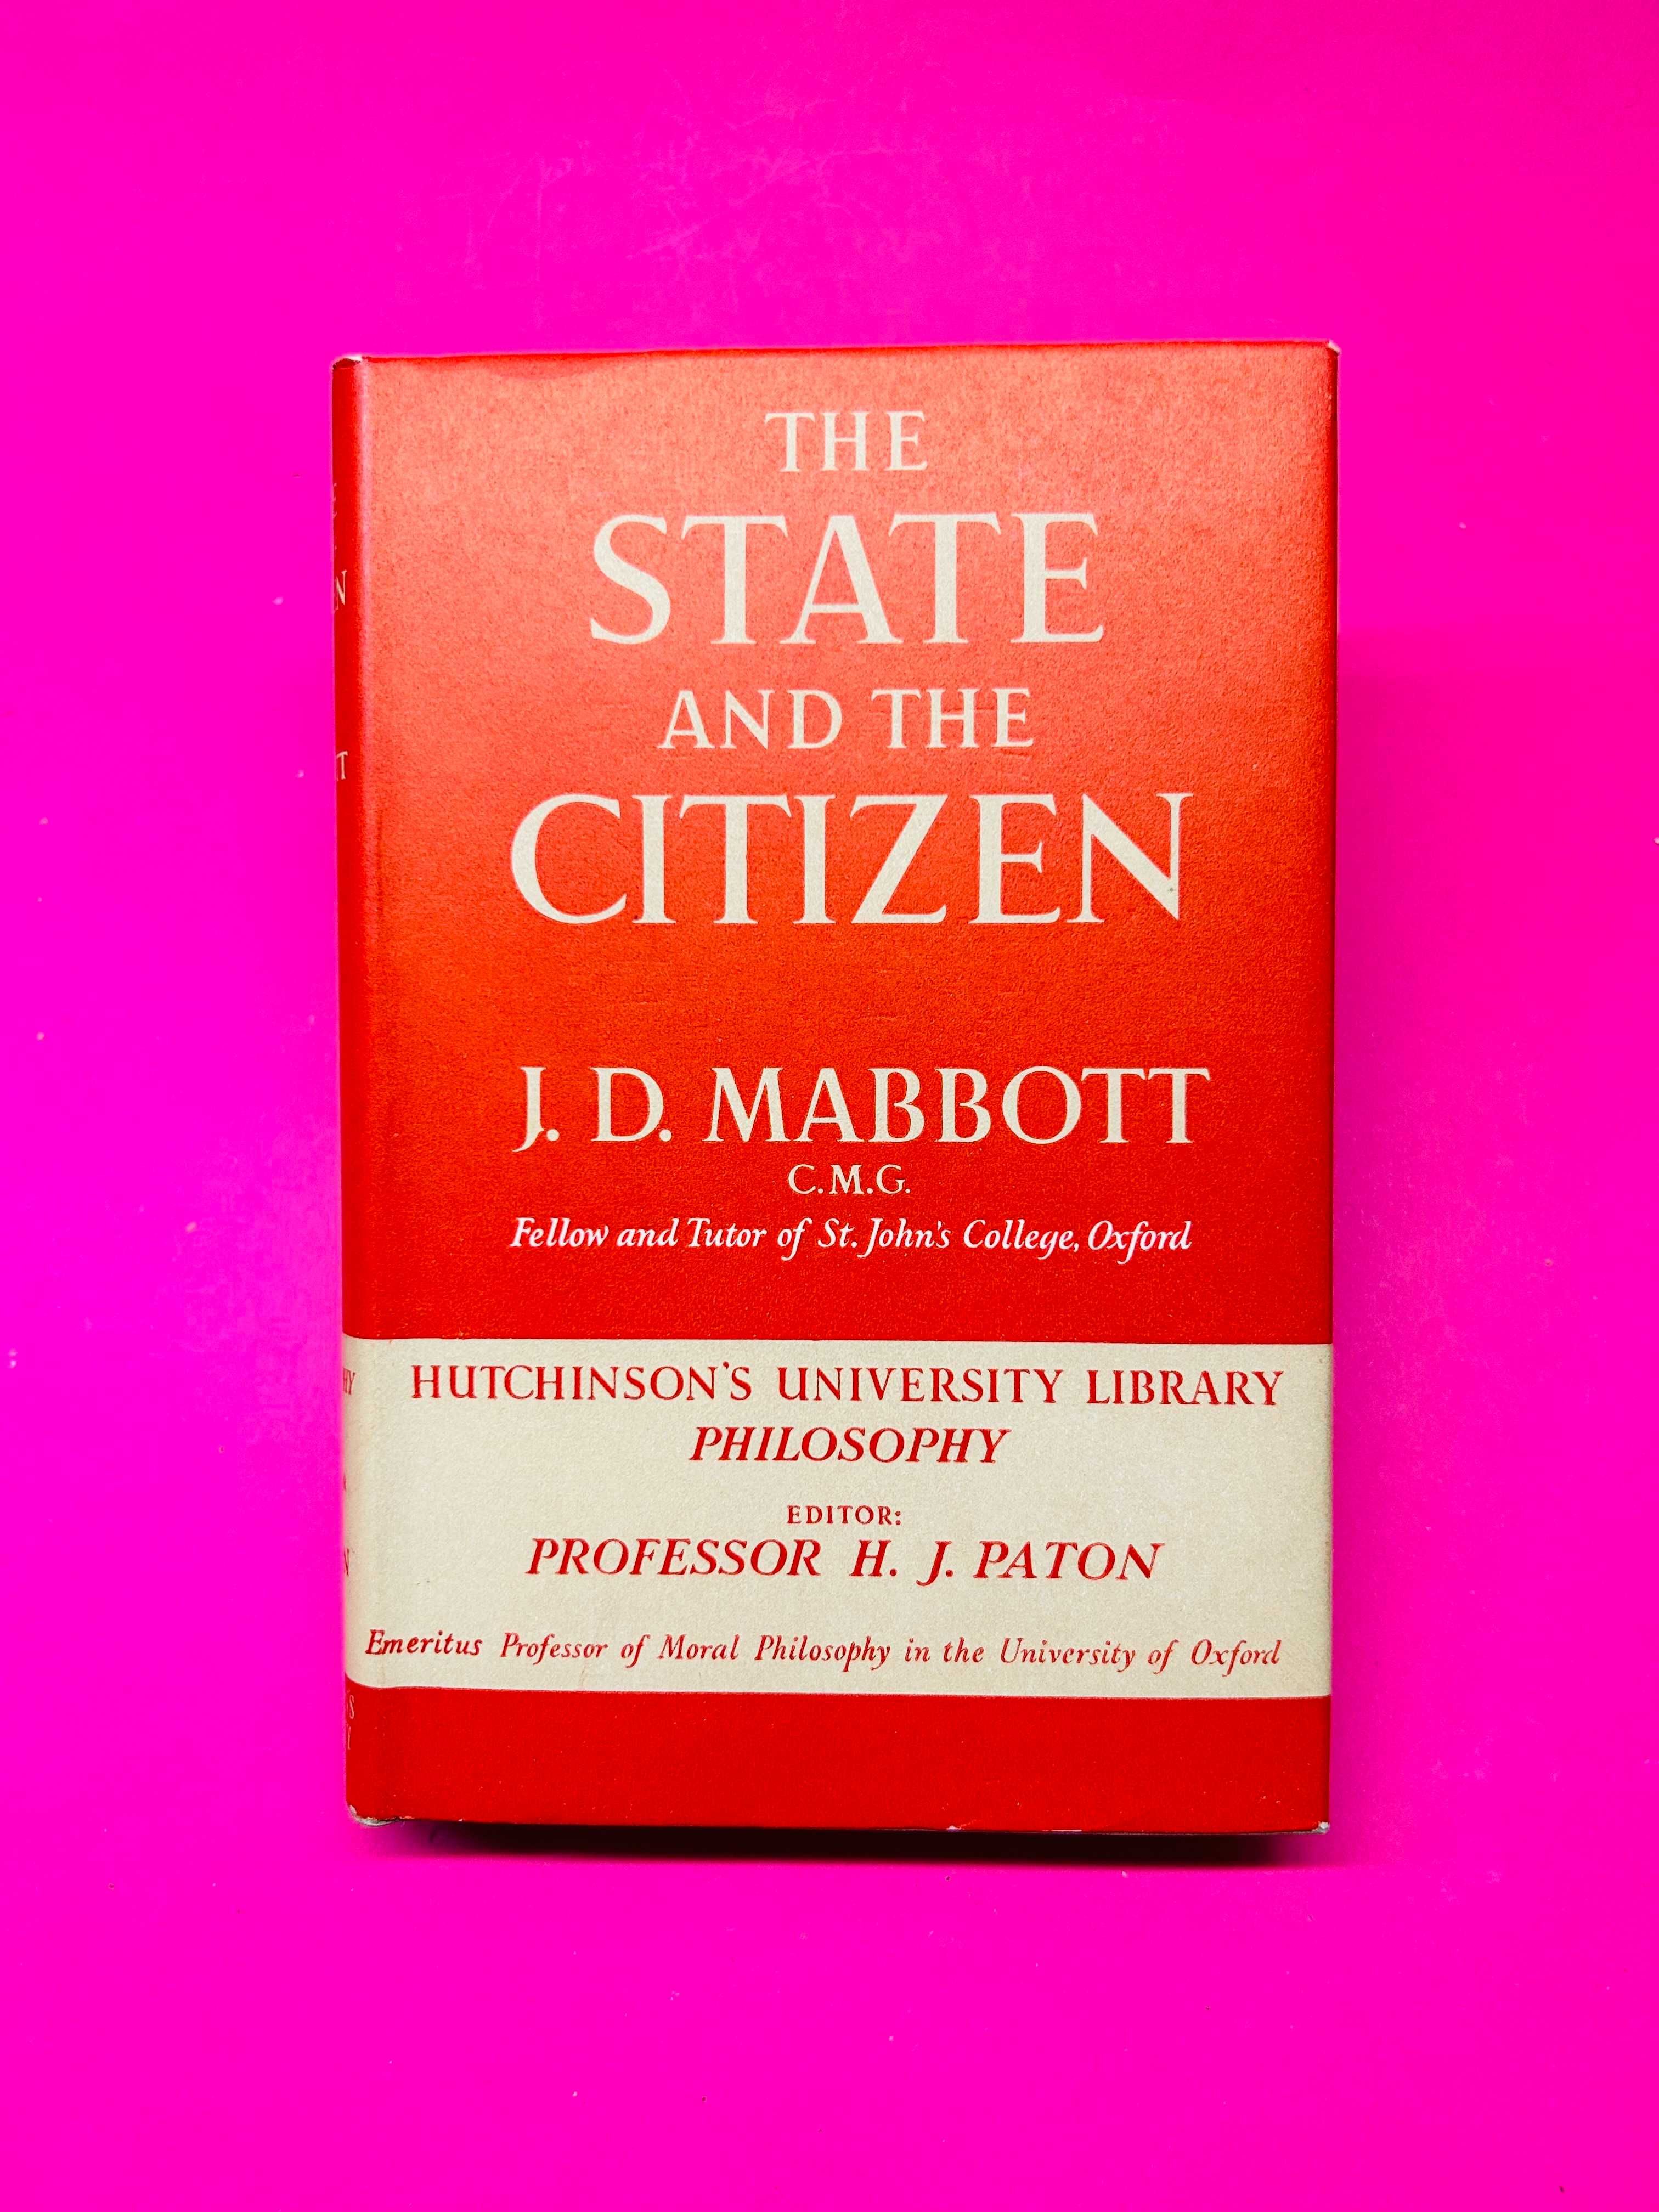 THE STATE AND THE CITIZEN - J. D. Mabbott